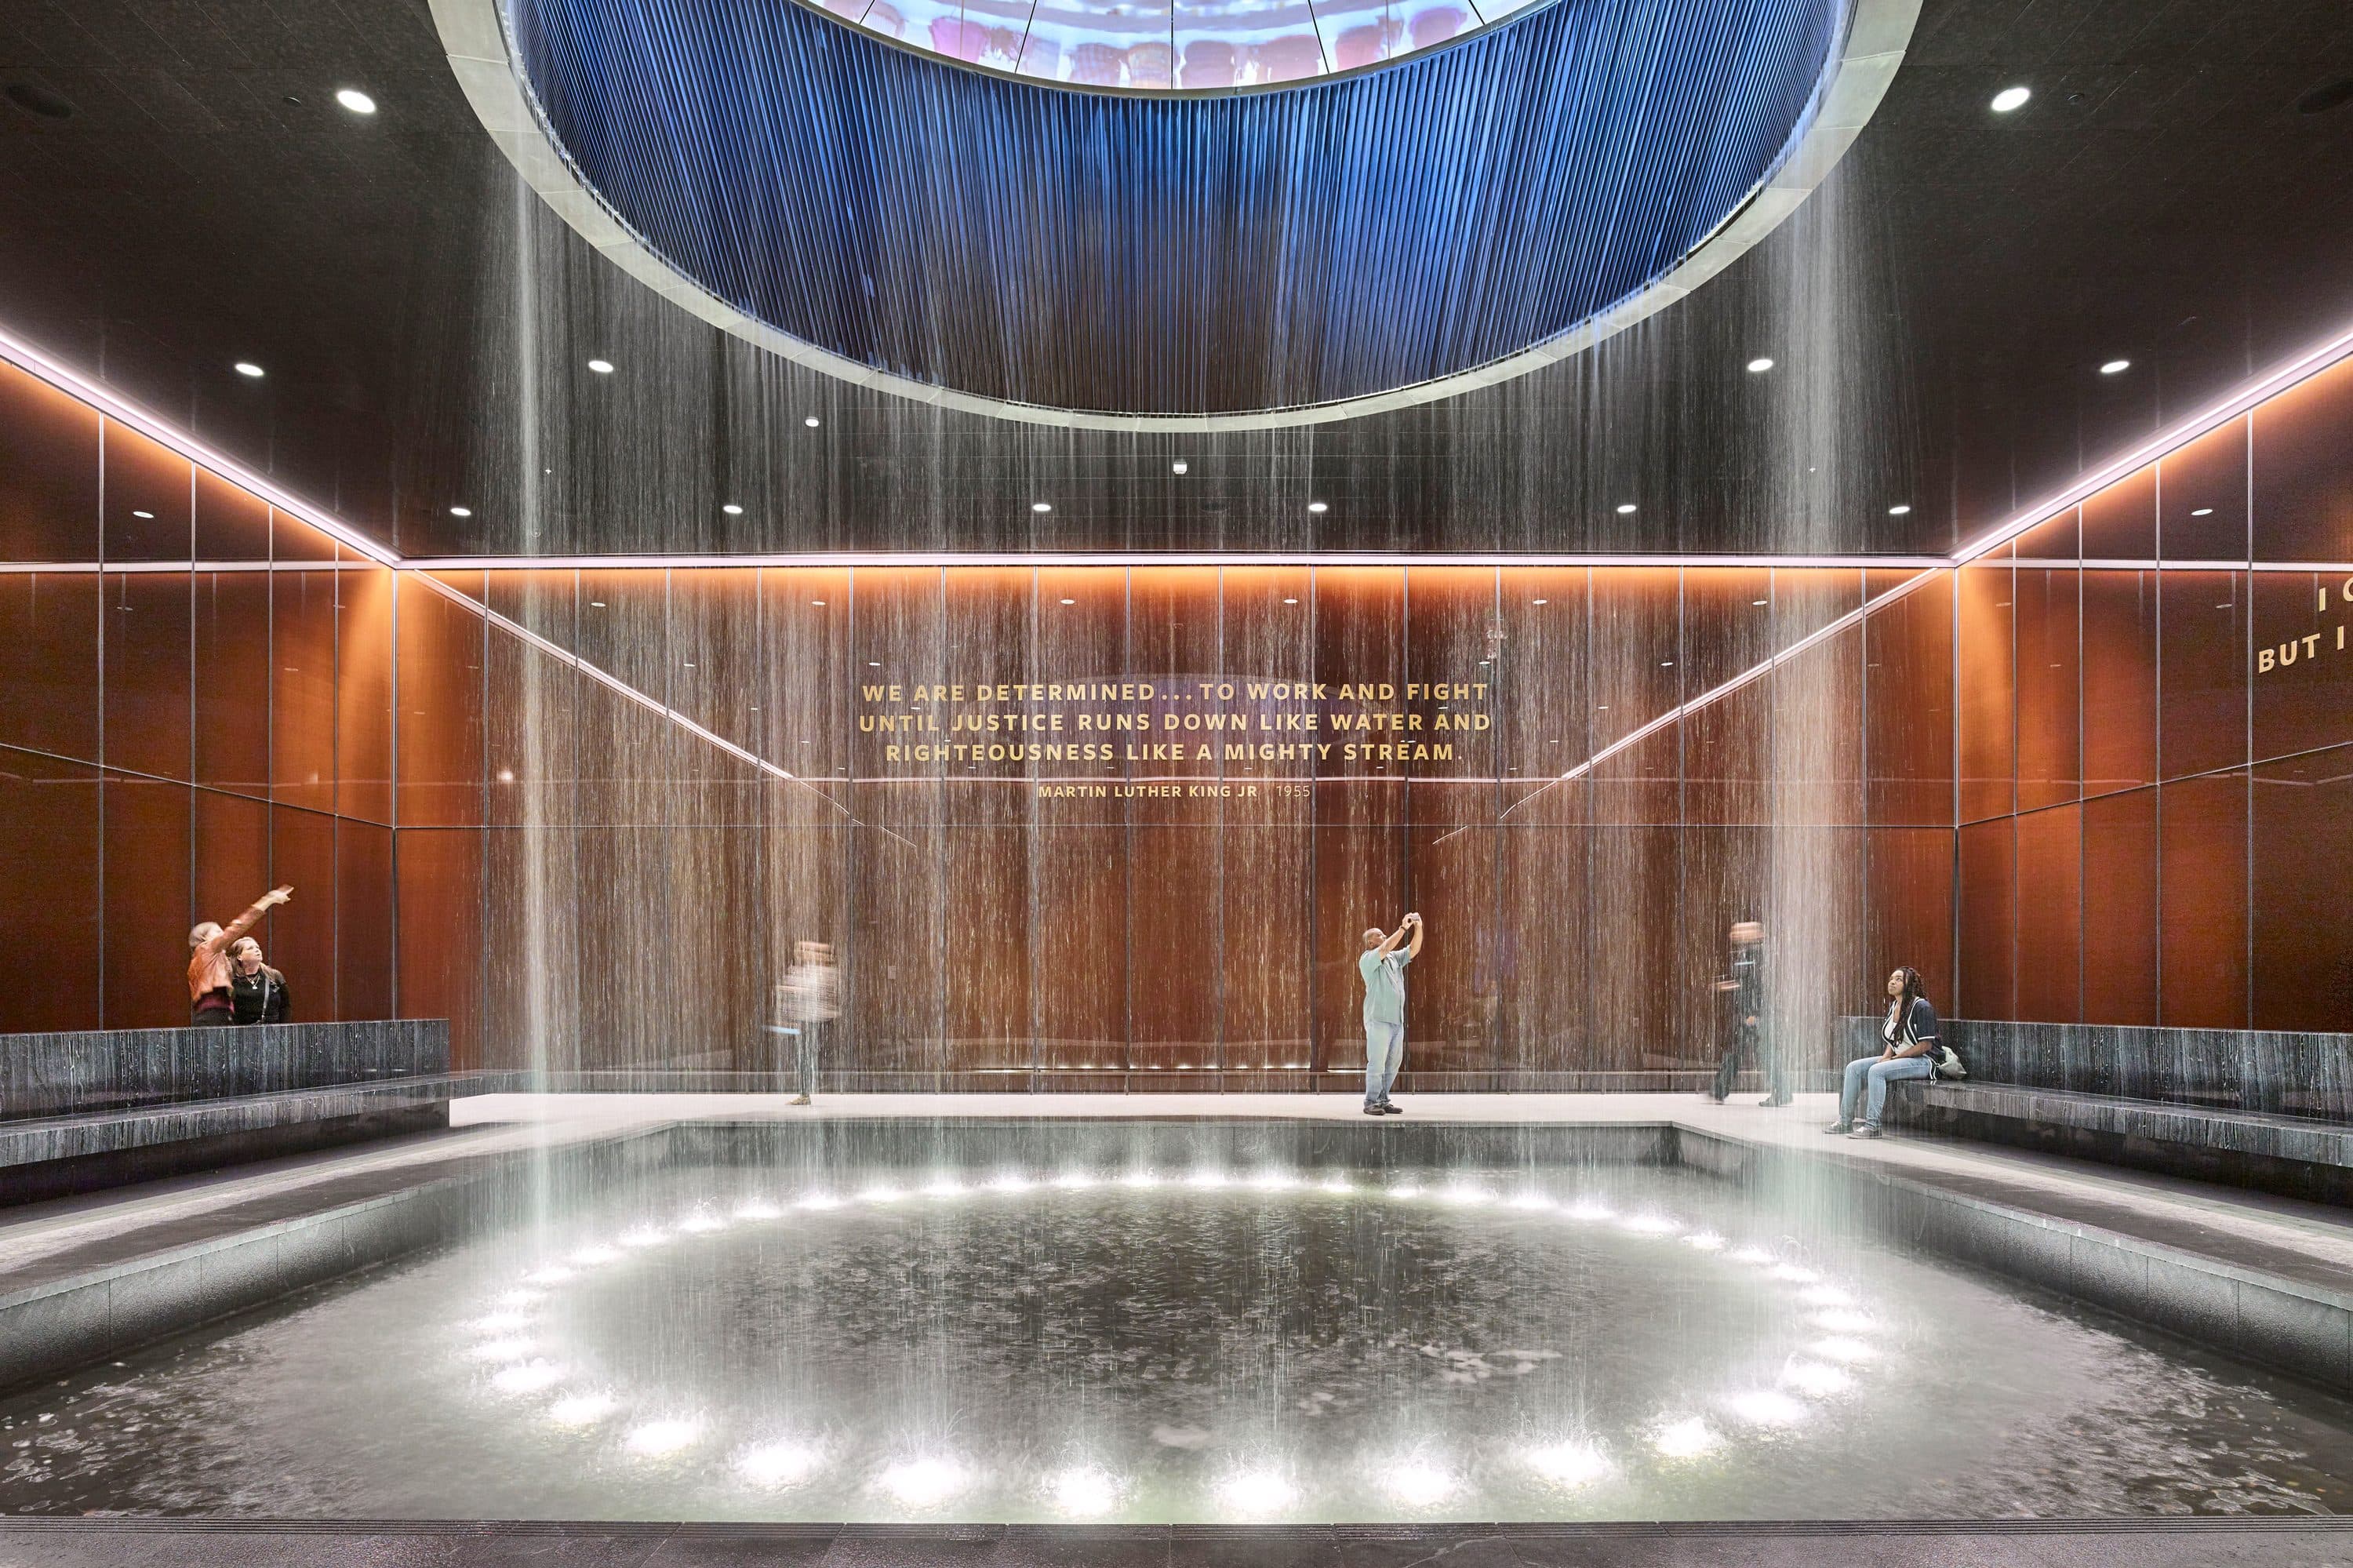 Visitors admire the metallic glass waterfall inside Contemplative Court 